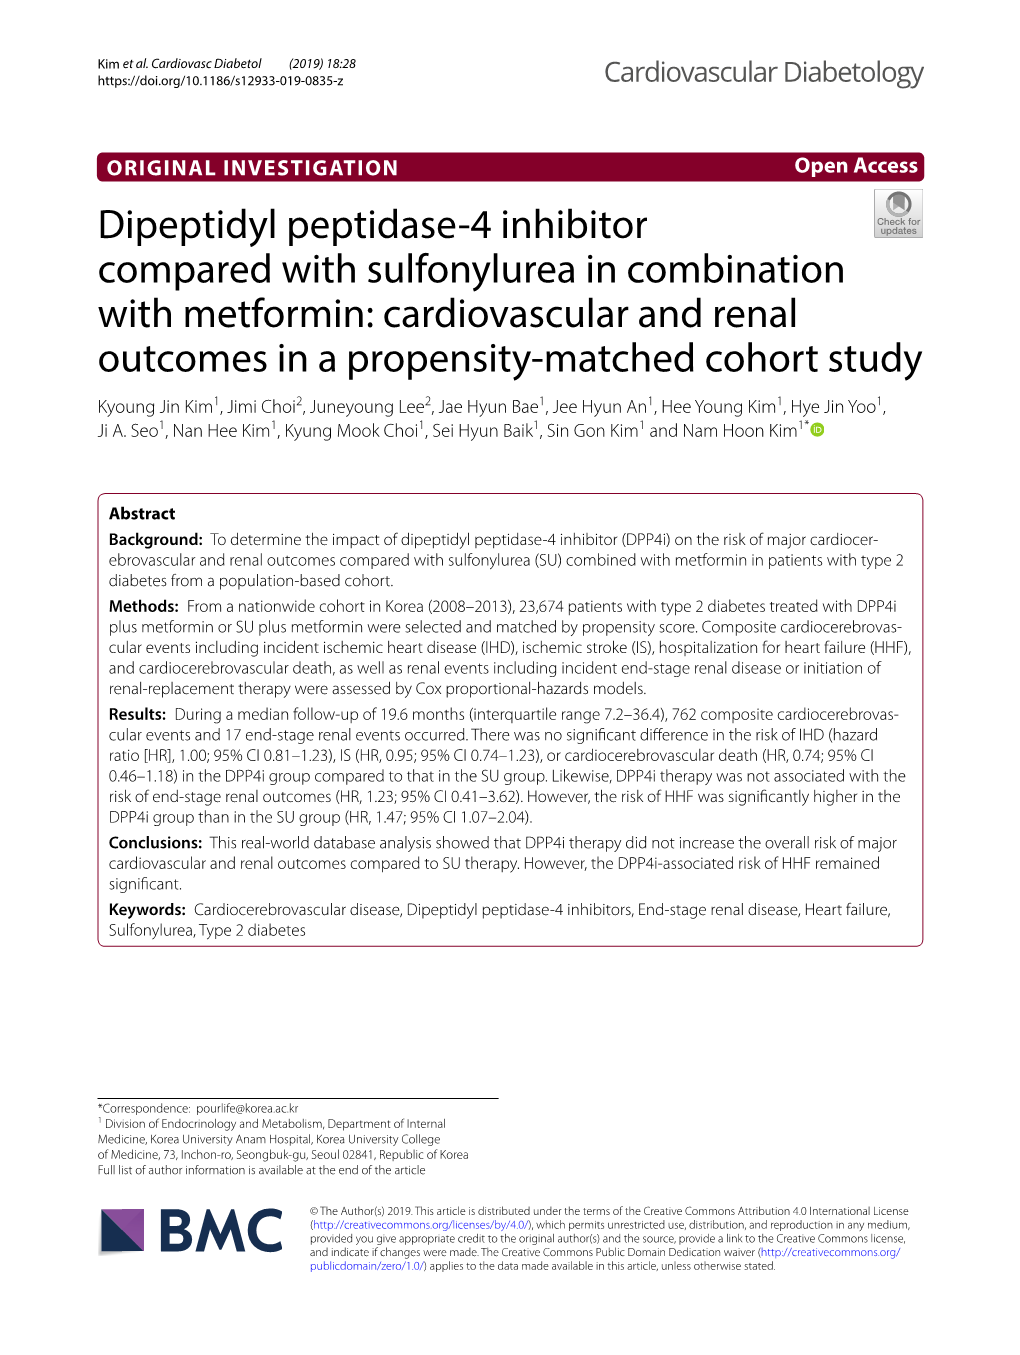 Dipeptidyl Peptidase-4 Inhibitor Compared with Sulfonylurea in Combination with Metformin: Cardiovascular and Renal Outcomes In